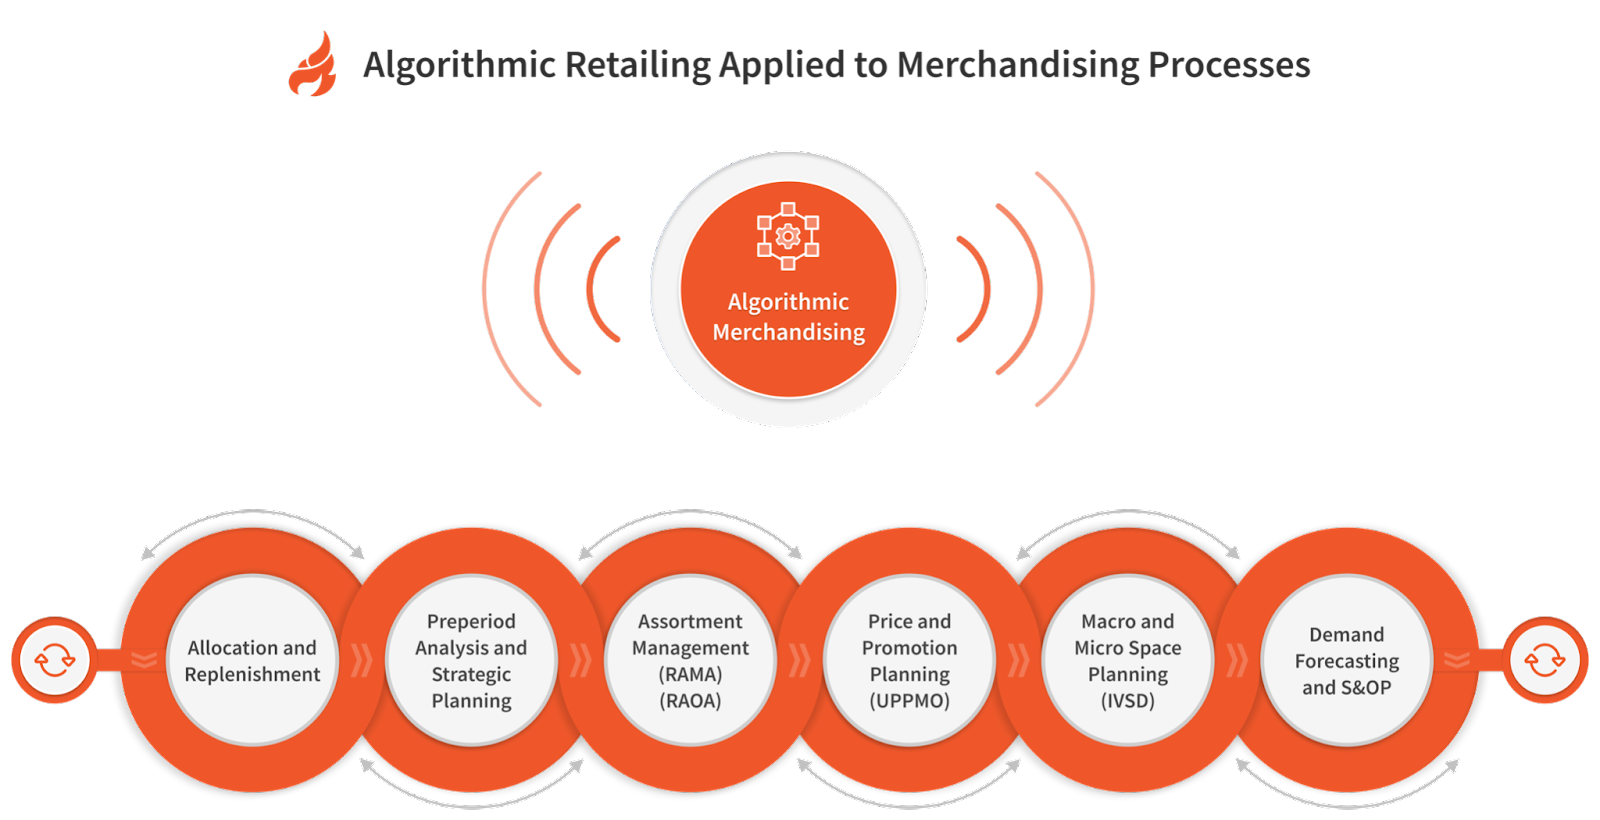 Algorithmic Retailing applied to Merchandising Processes